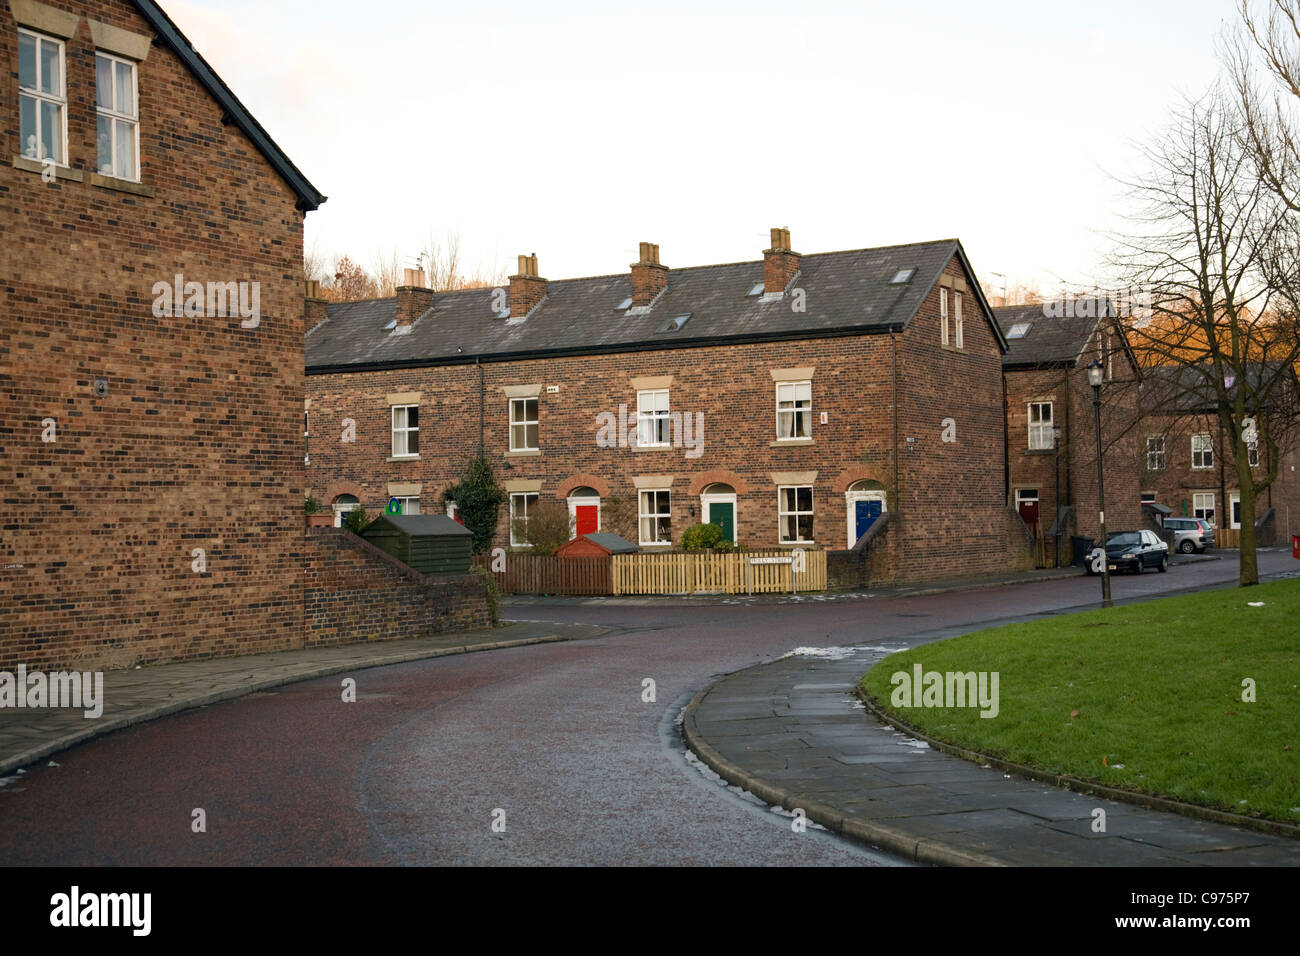 Refurbished and modernised former council houses in summerseat,lancashire,England Stock Photo